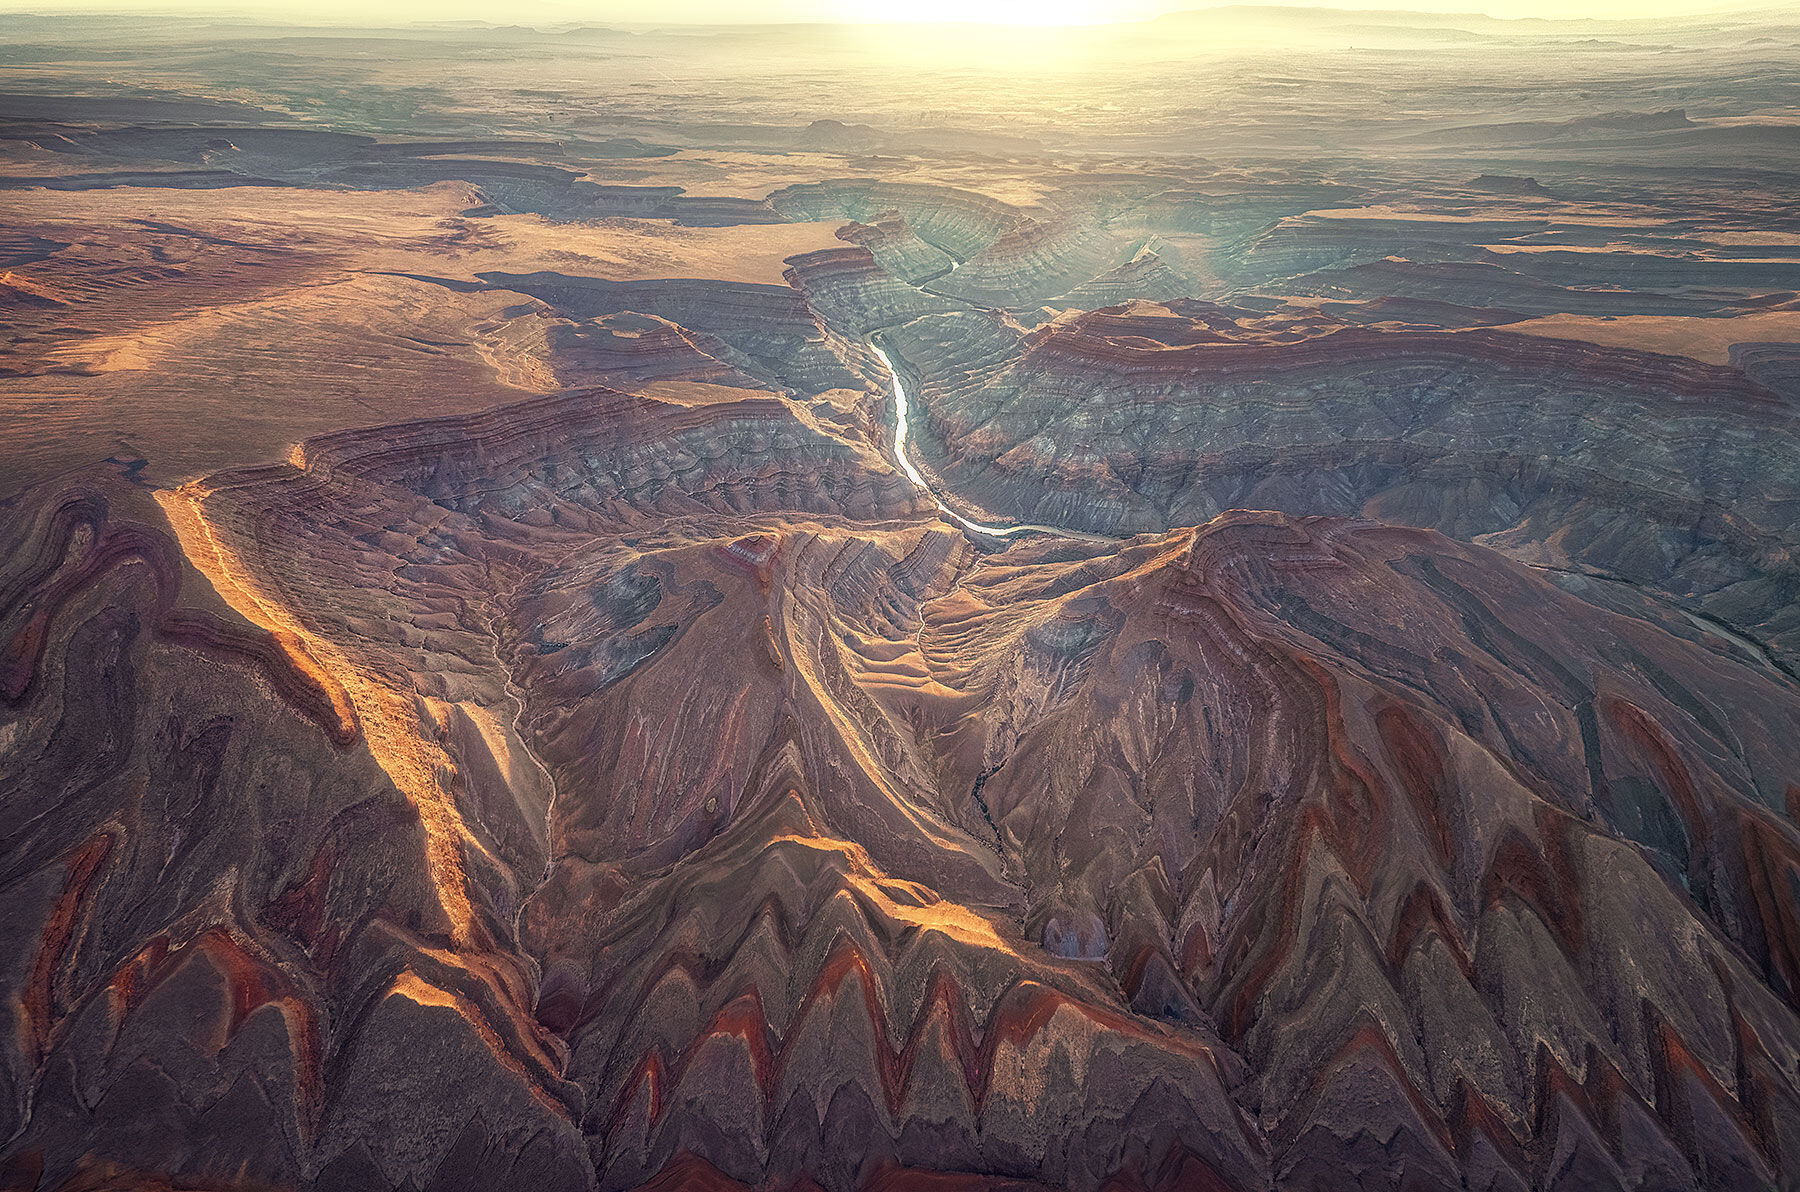 You can really see the long effects of erosion across the geological spectacle that is southern Utah in this aerial image from...